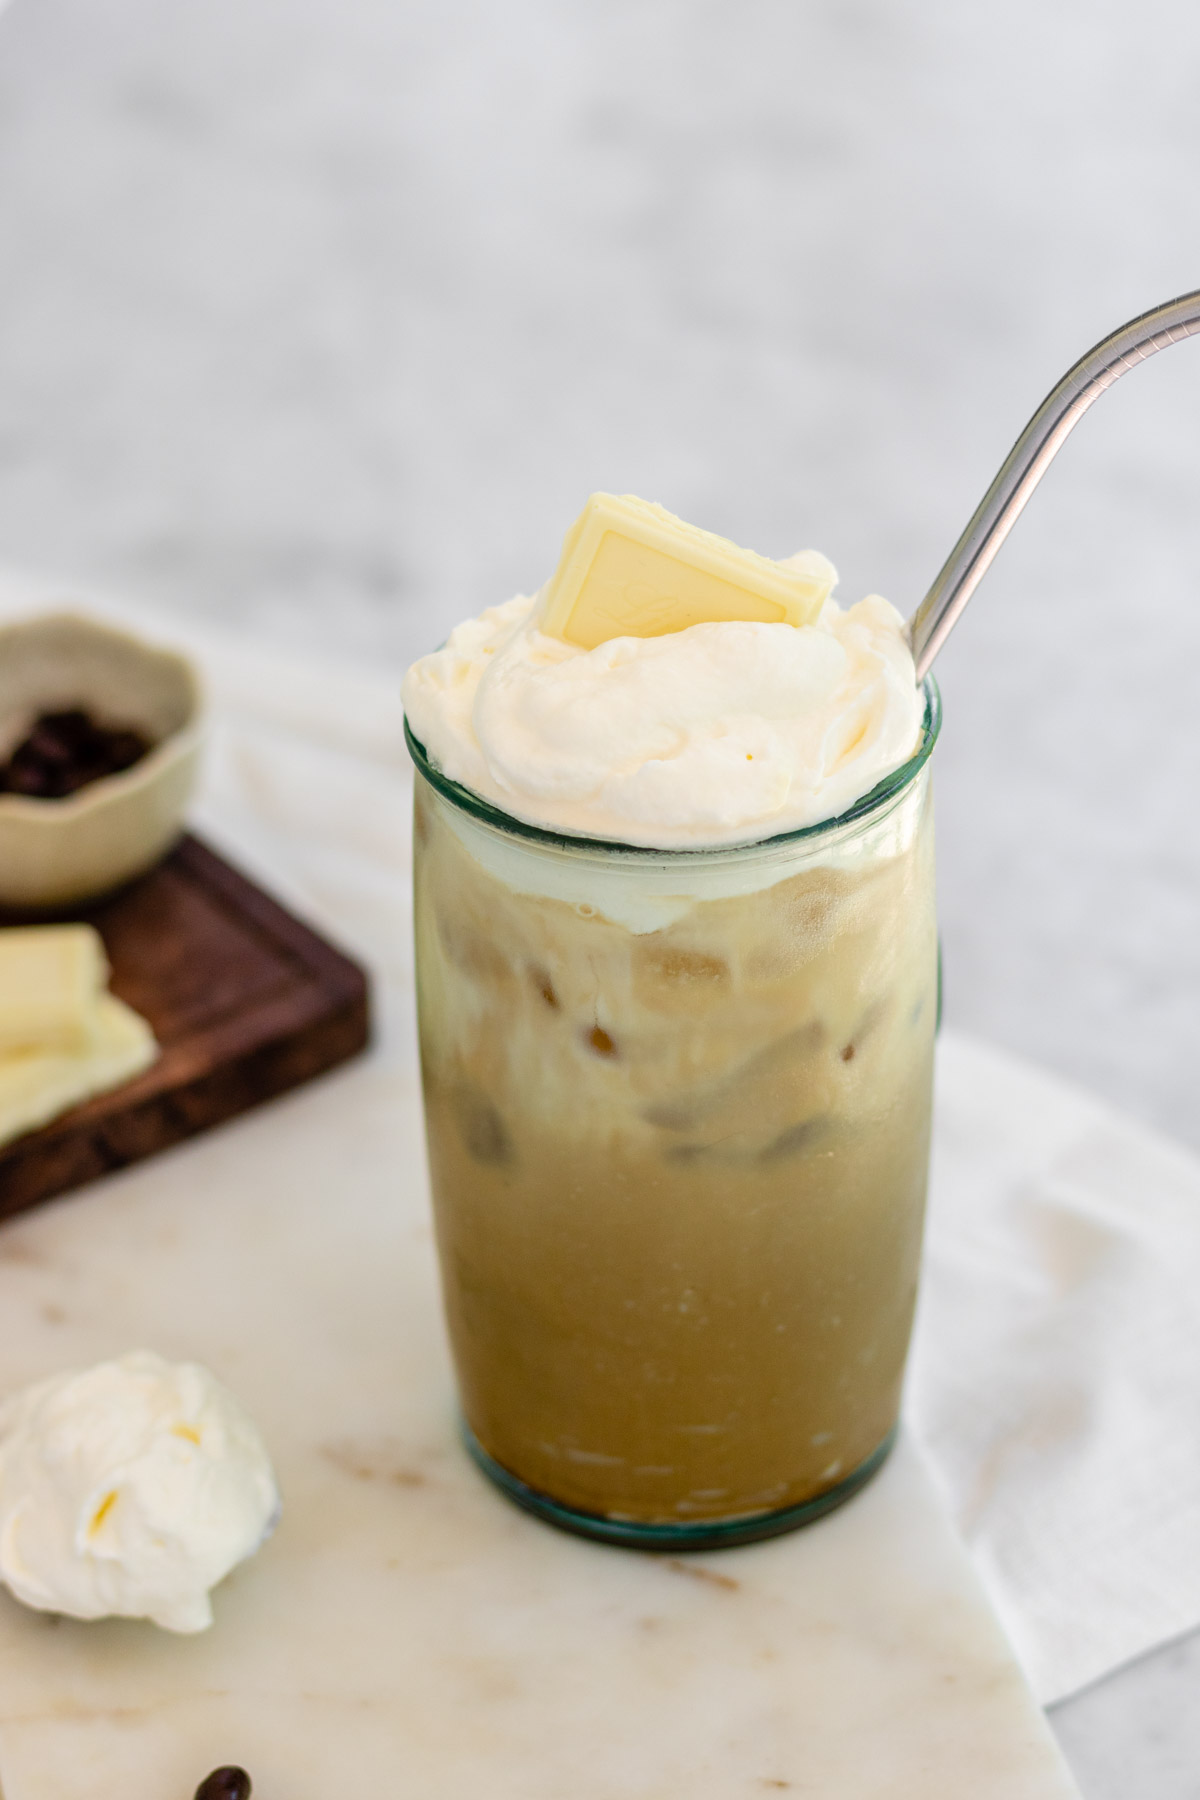 Iced coffee in a tall glass with whipped cream and a white chocolate square on top.